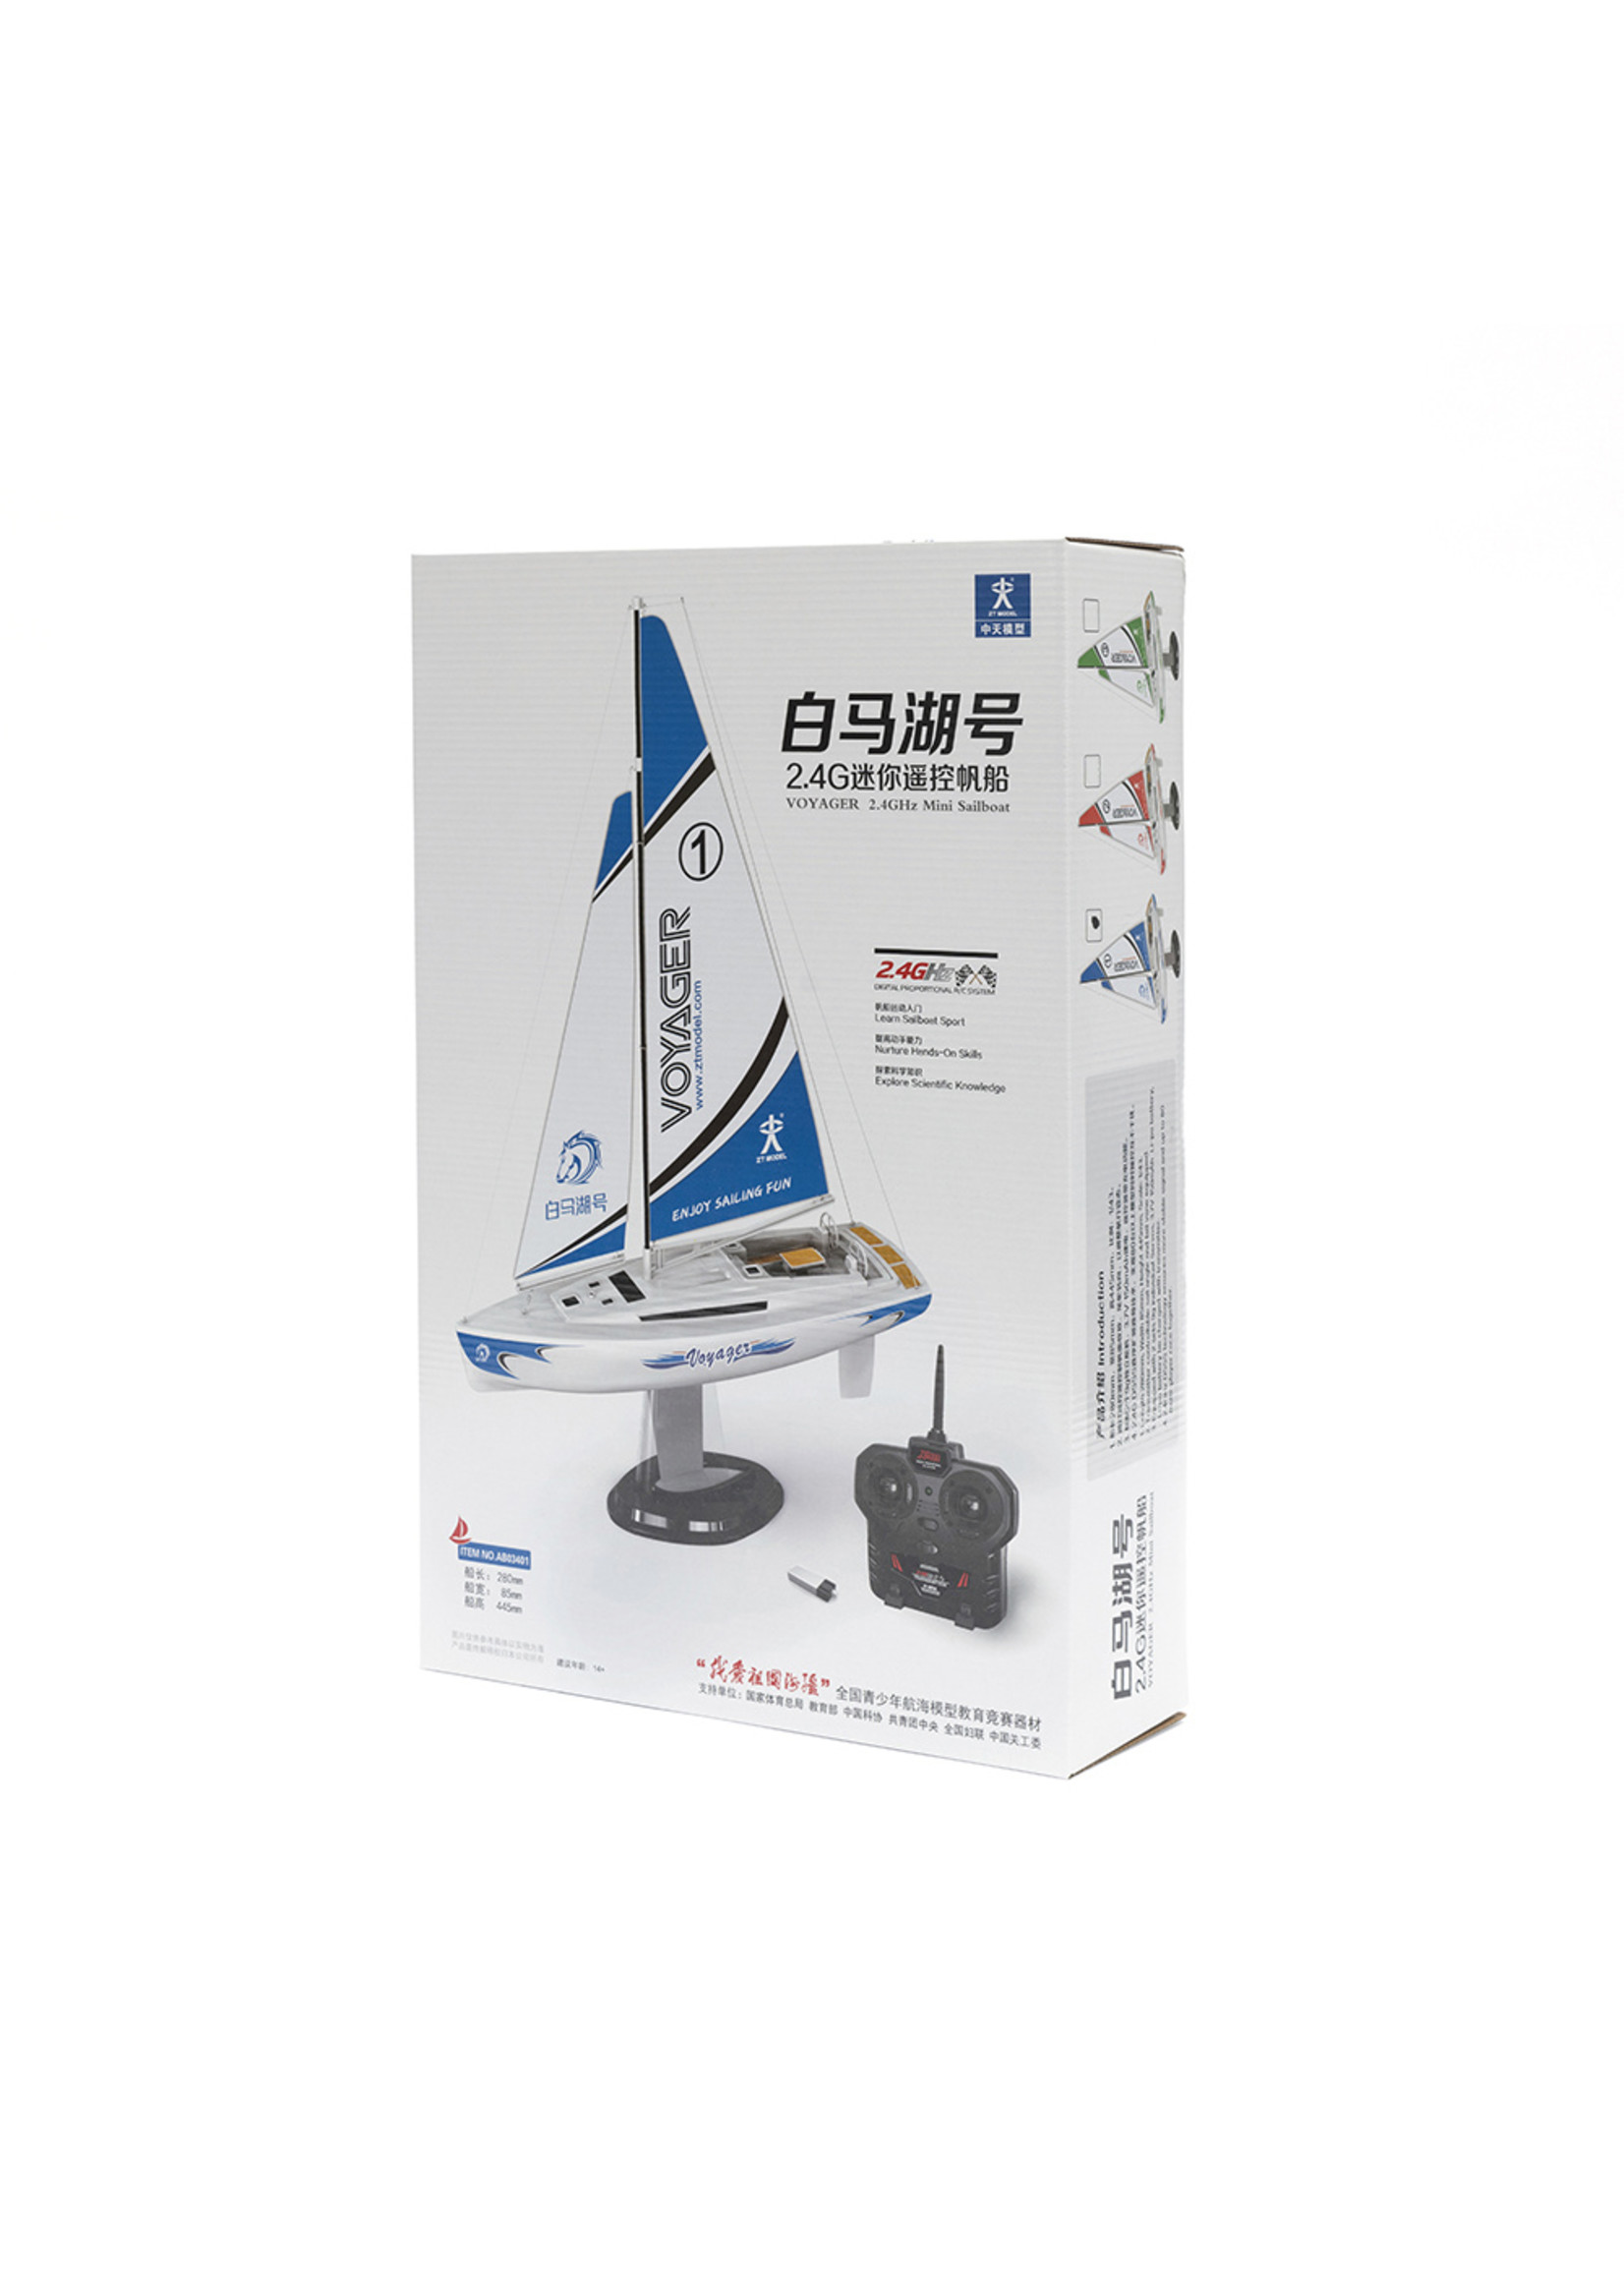 Play Steam Voyager 280 Wind-Power RC Sailboat - Blue